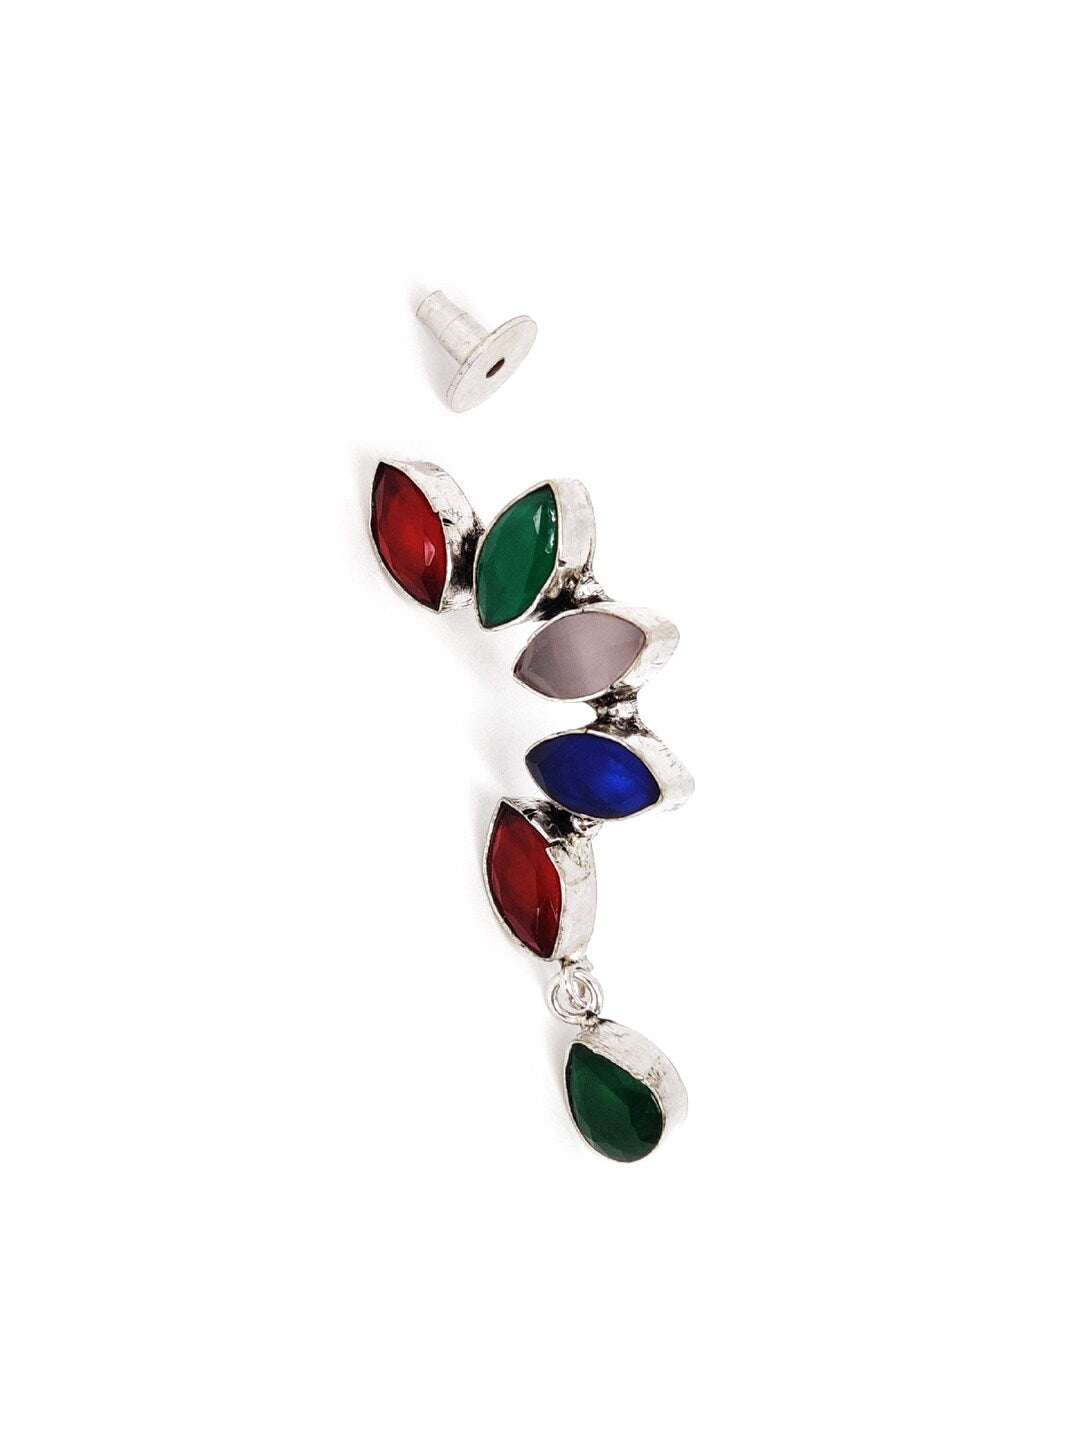 EL REGALO Red & Green Contemporary German Silver Ear Cuff Earrings - for Women and Girls
Style ID: 16770286